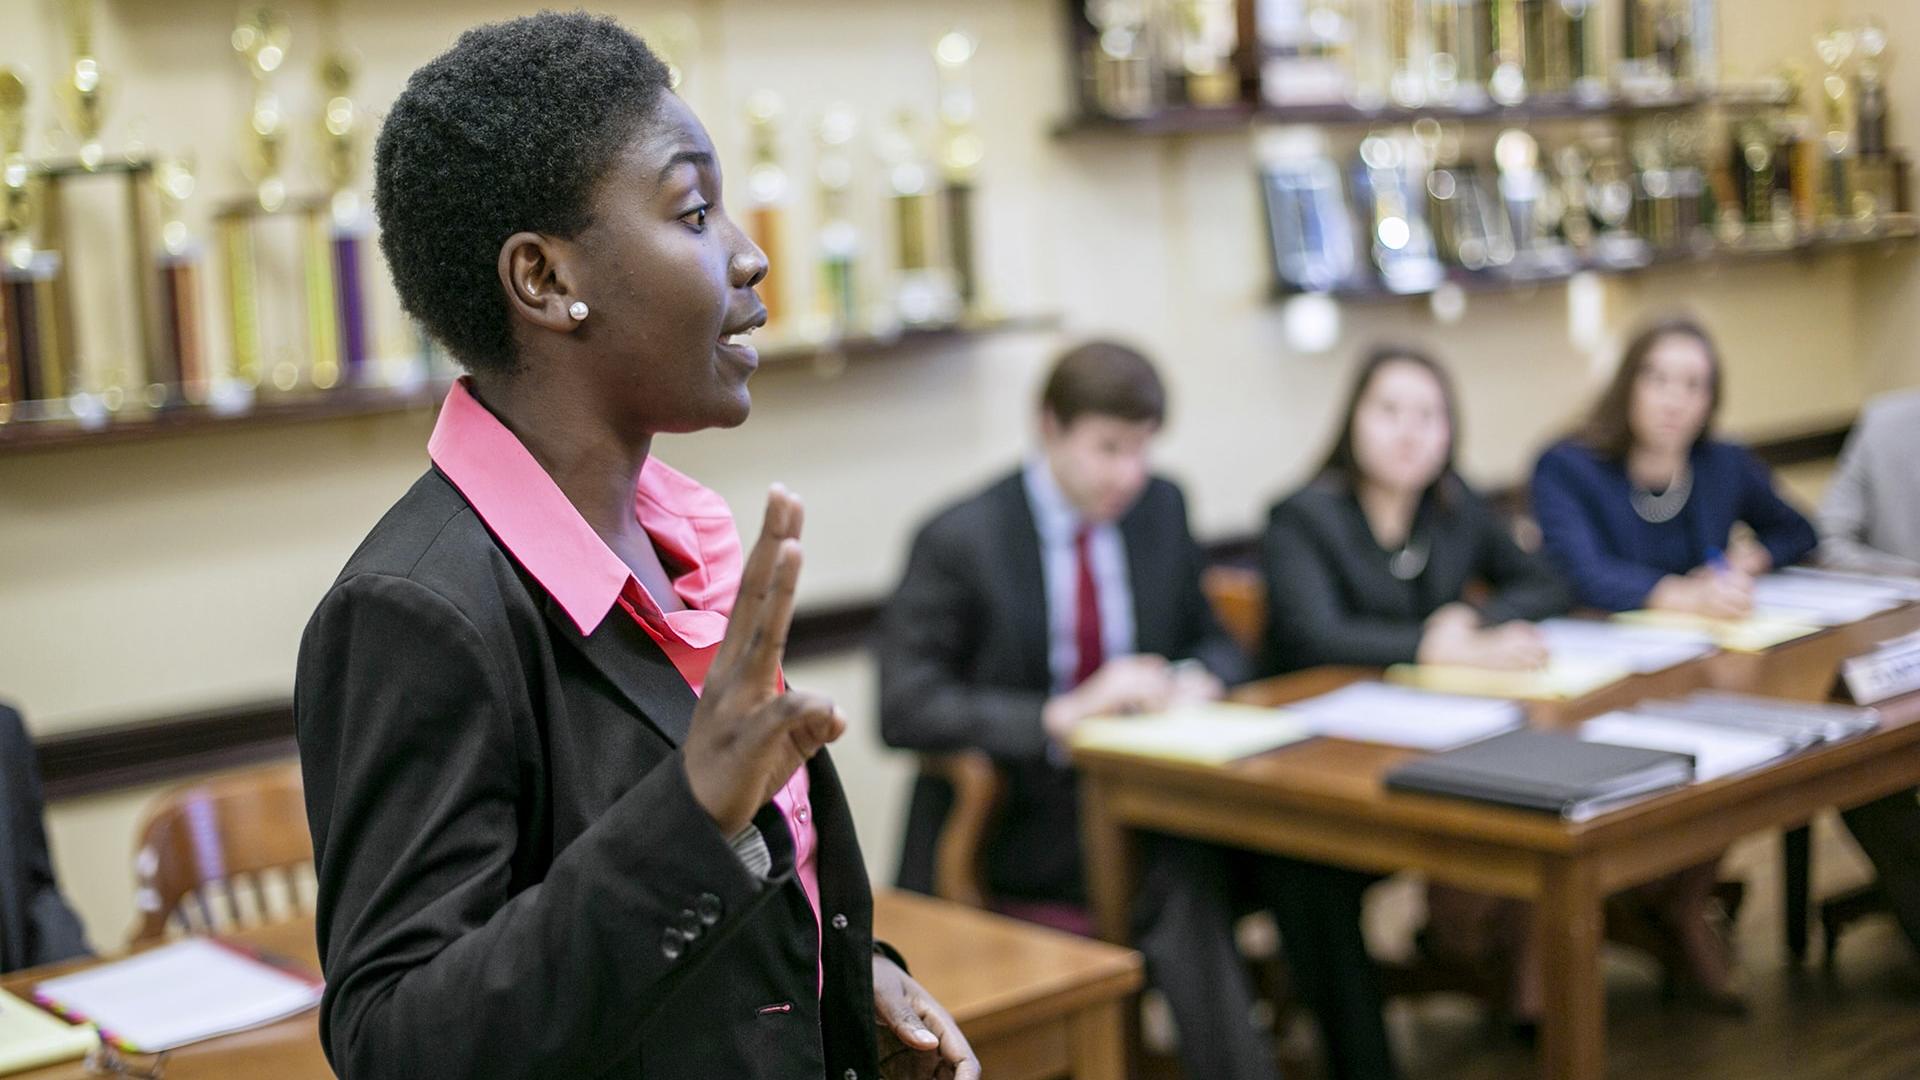 a young woman in a suit speaks before students at a desk in a room lined with trophies